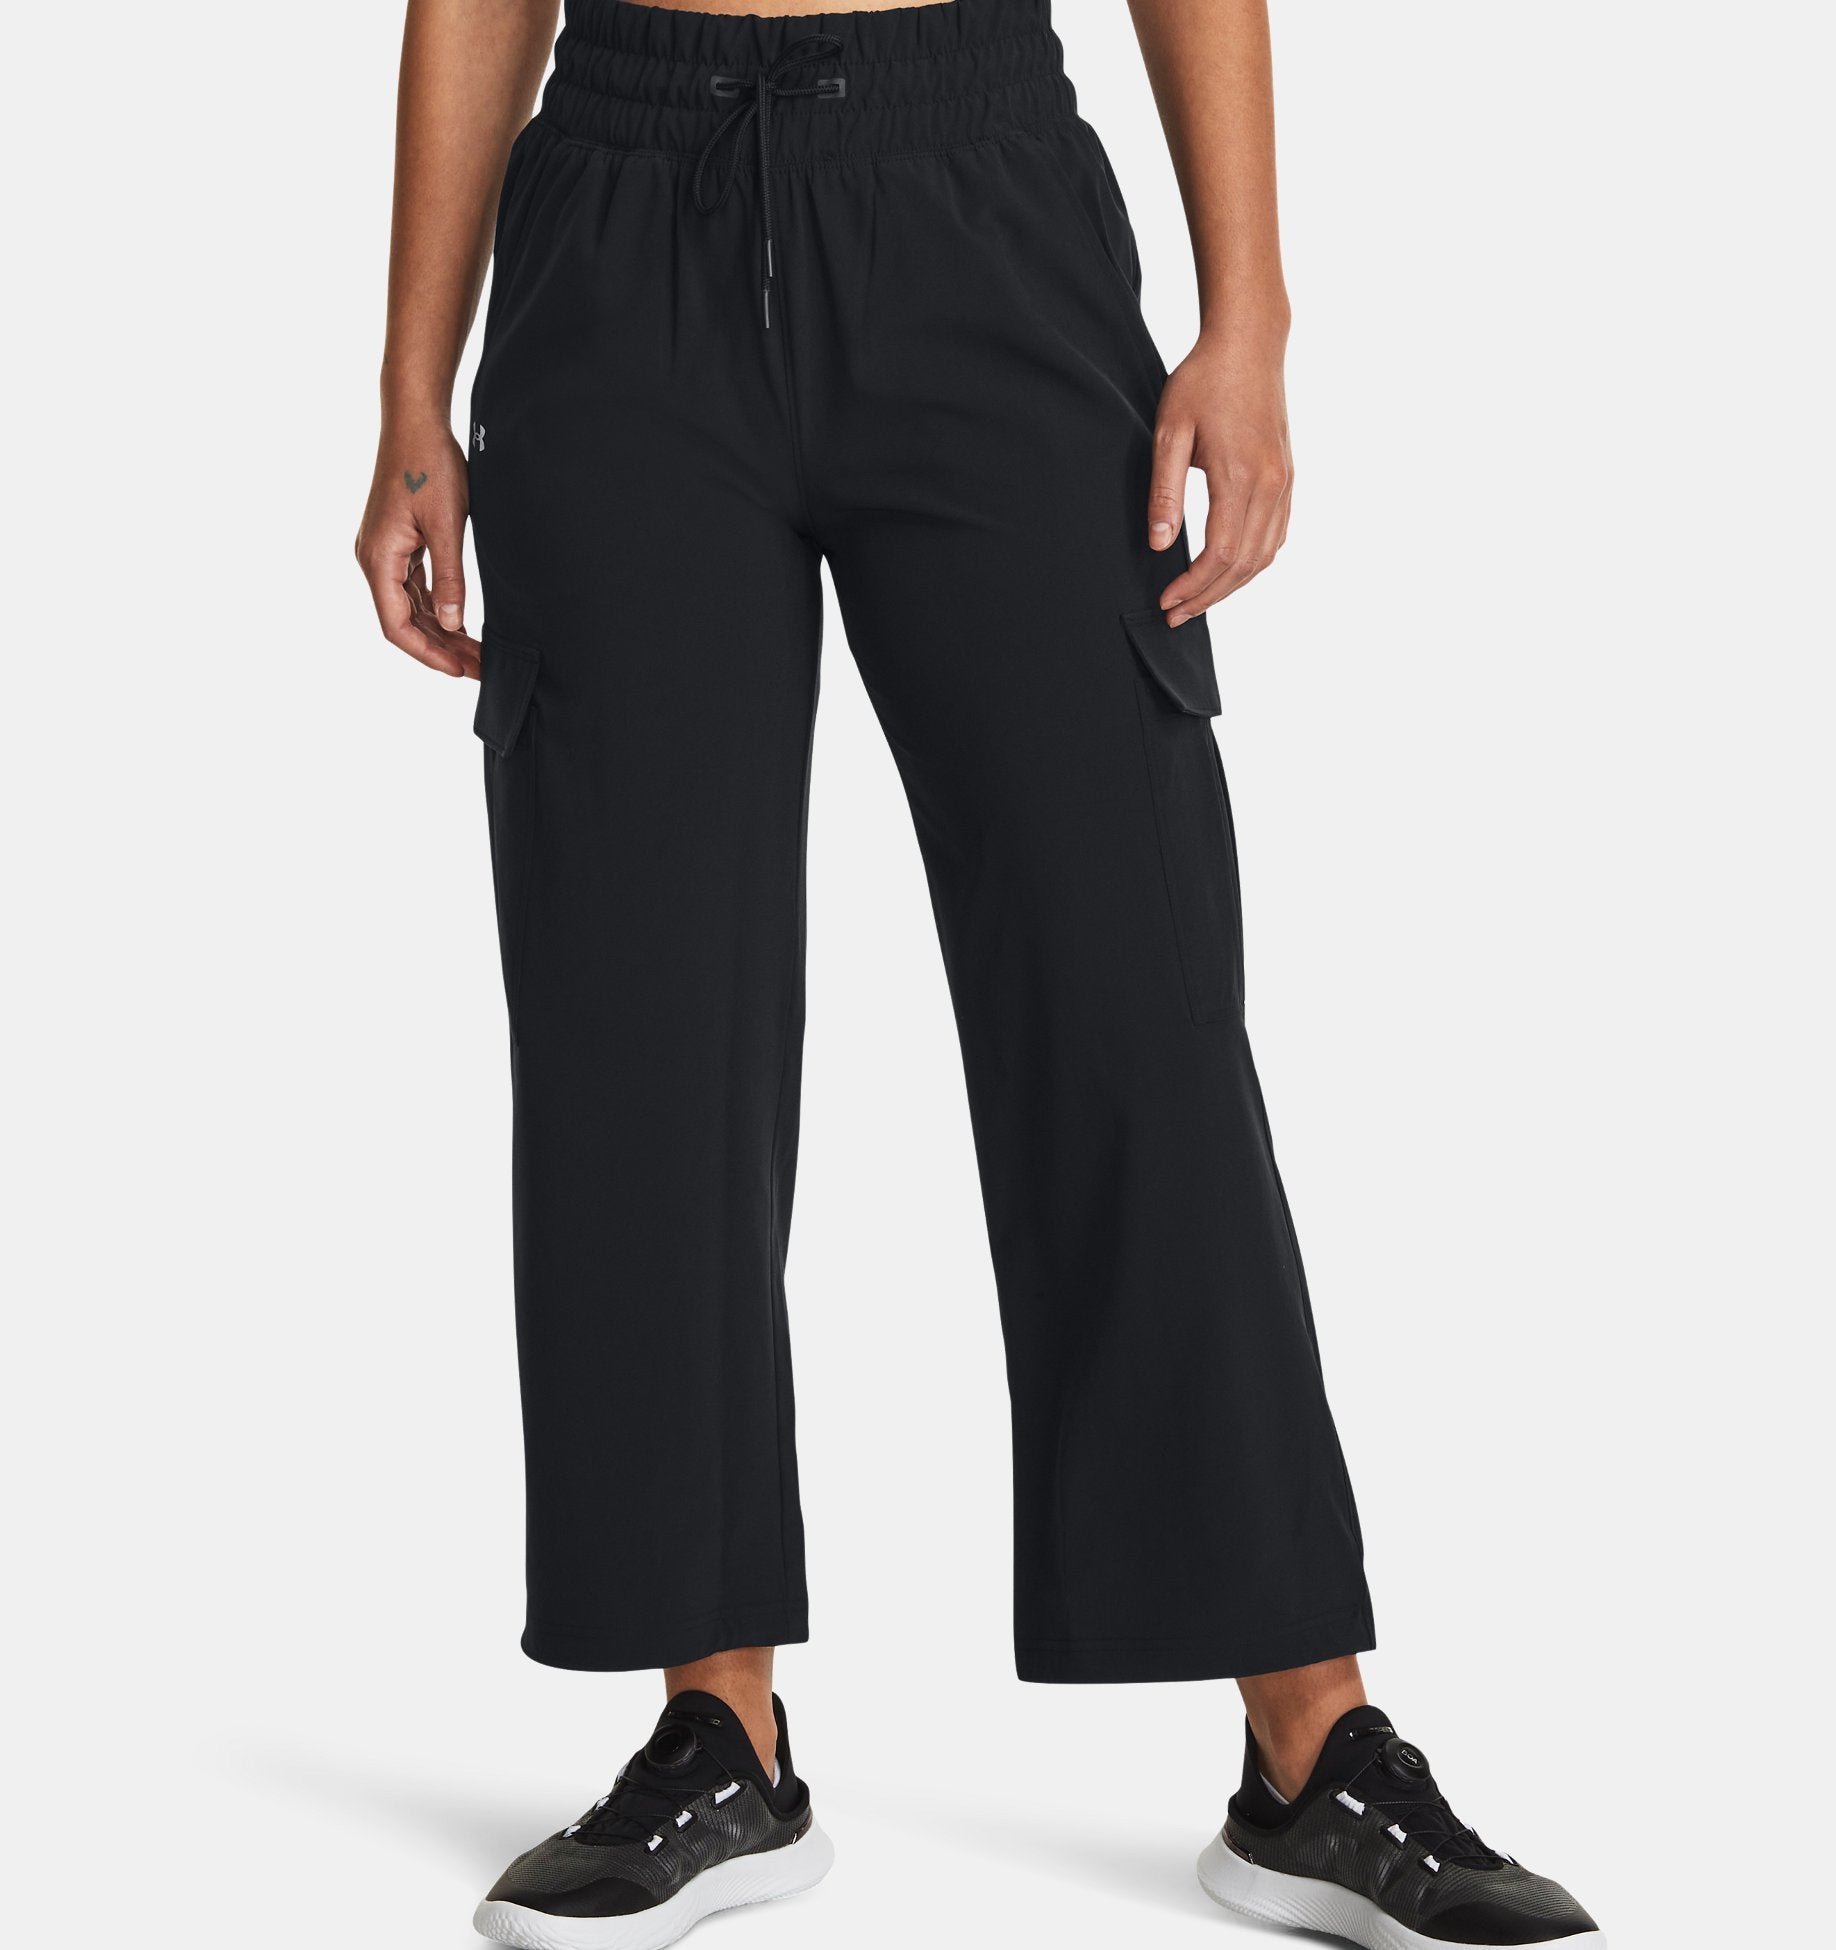 Under Armour Women's High Waisted Woven Pants – Ernie's Sports Experts